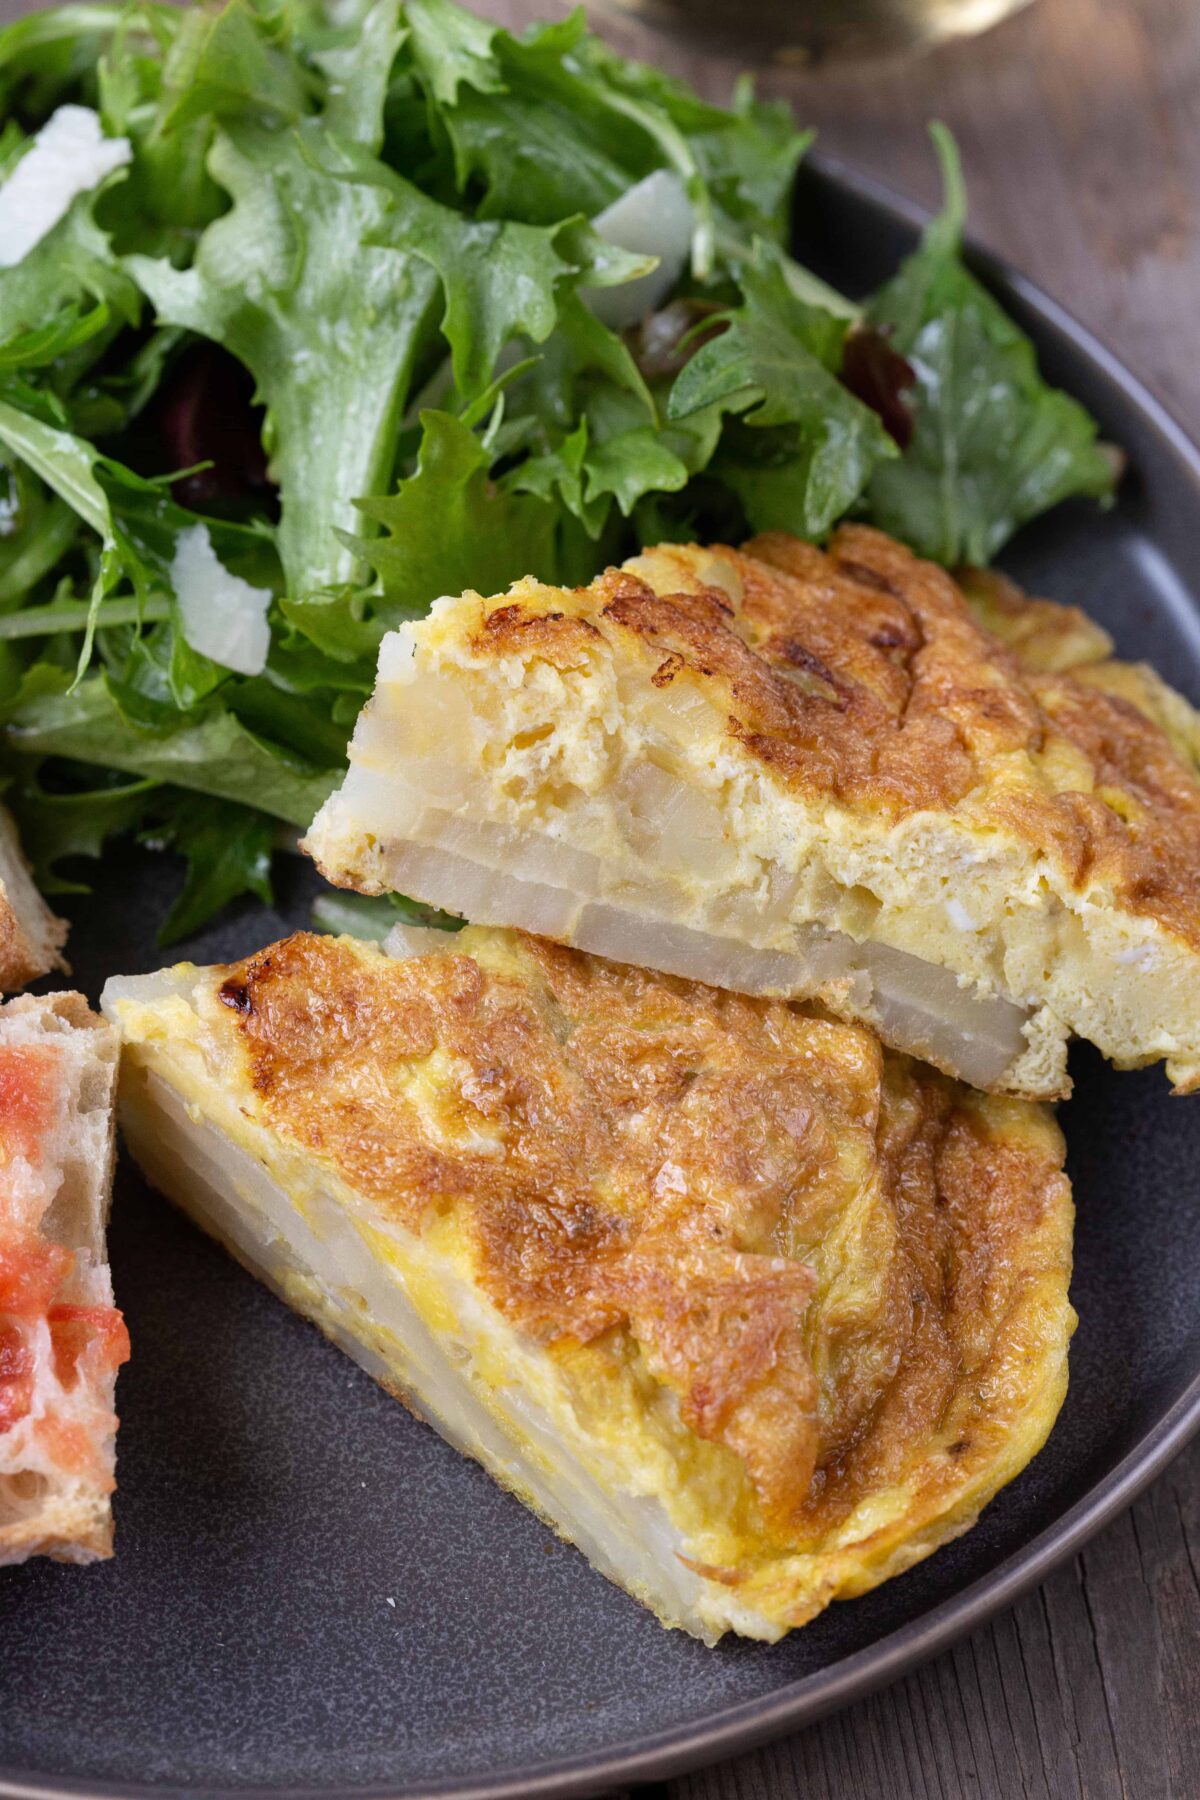 Tortilla Espanola (Spanish Potato Omelette) on a plate with a leafy green salad.